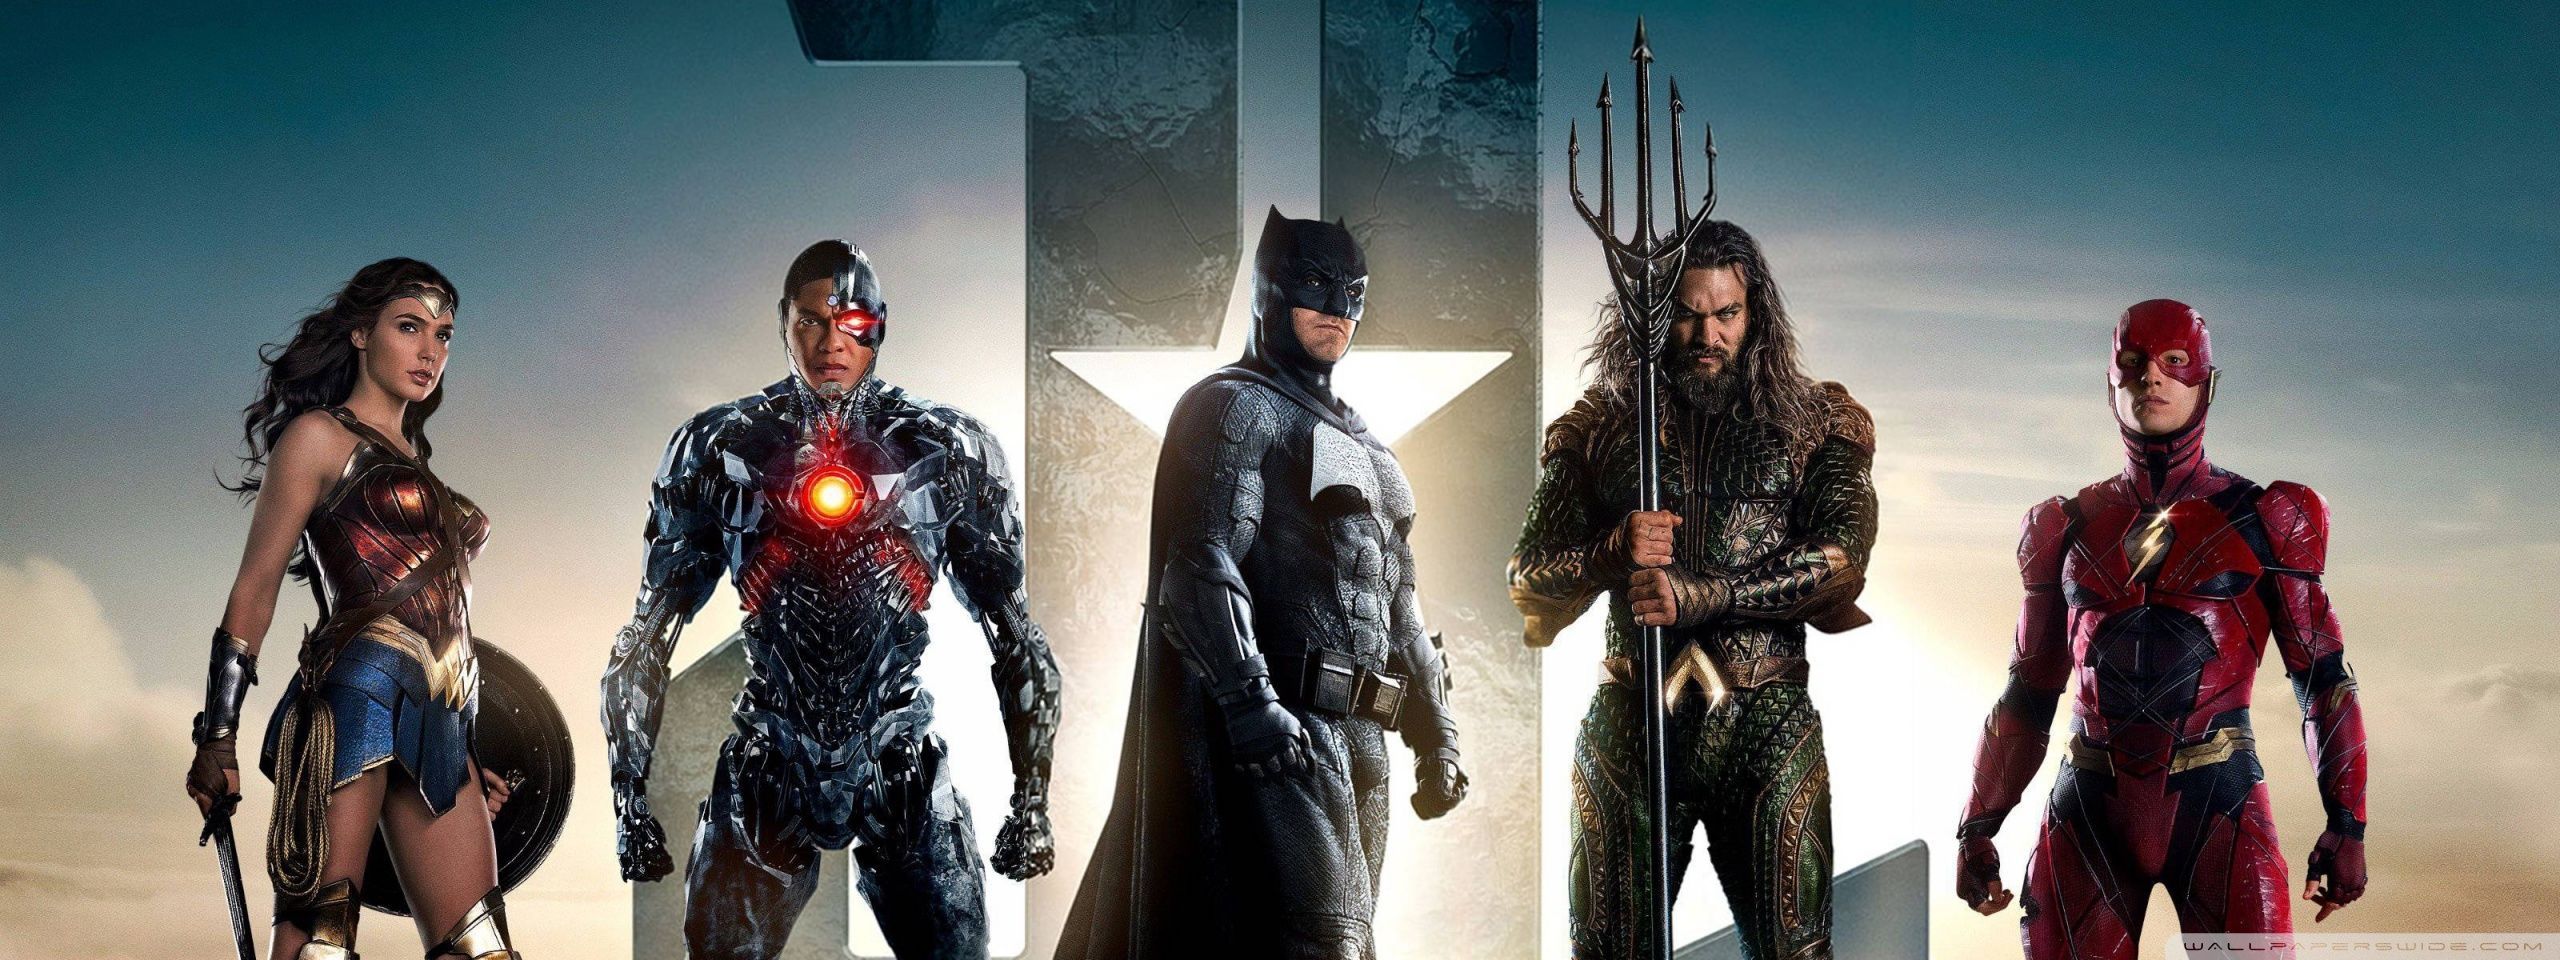 Justice League Dual Monitor Wallpaper Free Justice League